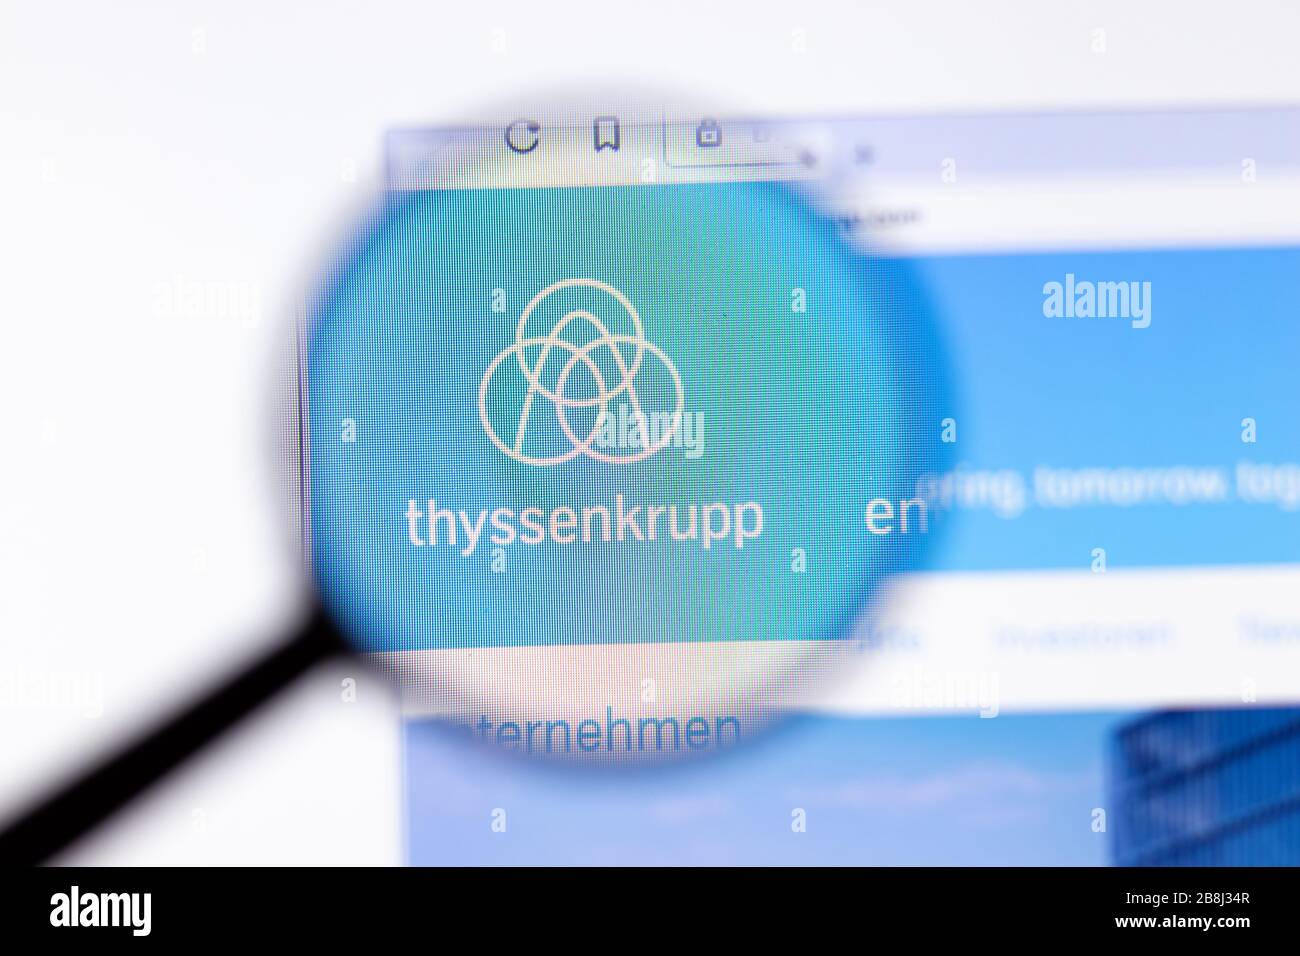 Los Angeles, California, USA - 20 March 2020: ThyssenKrupp company logo on website page close-up on screen, Illustrative Editorial Stock Photo